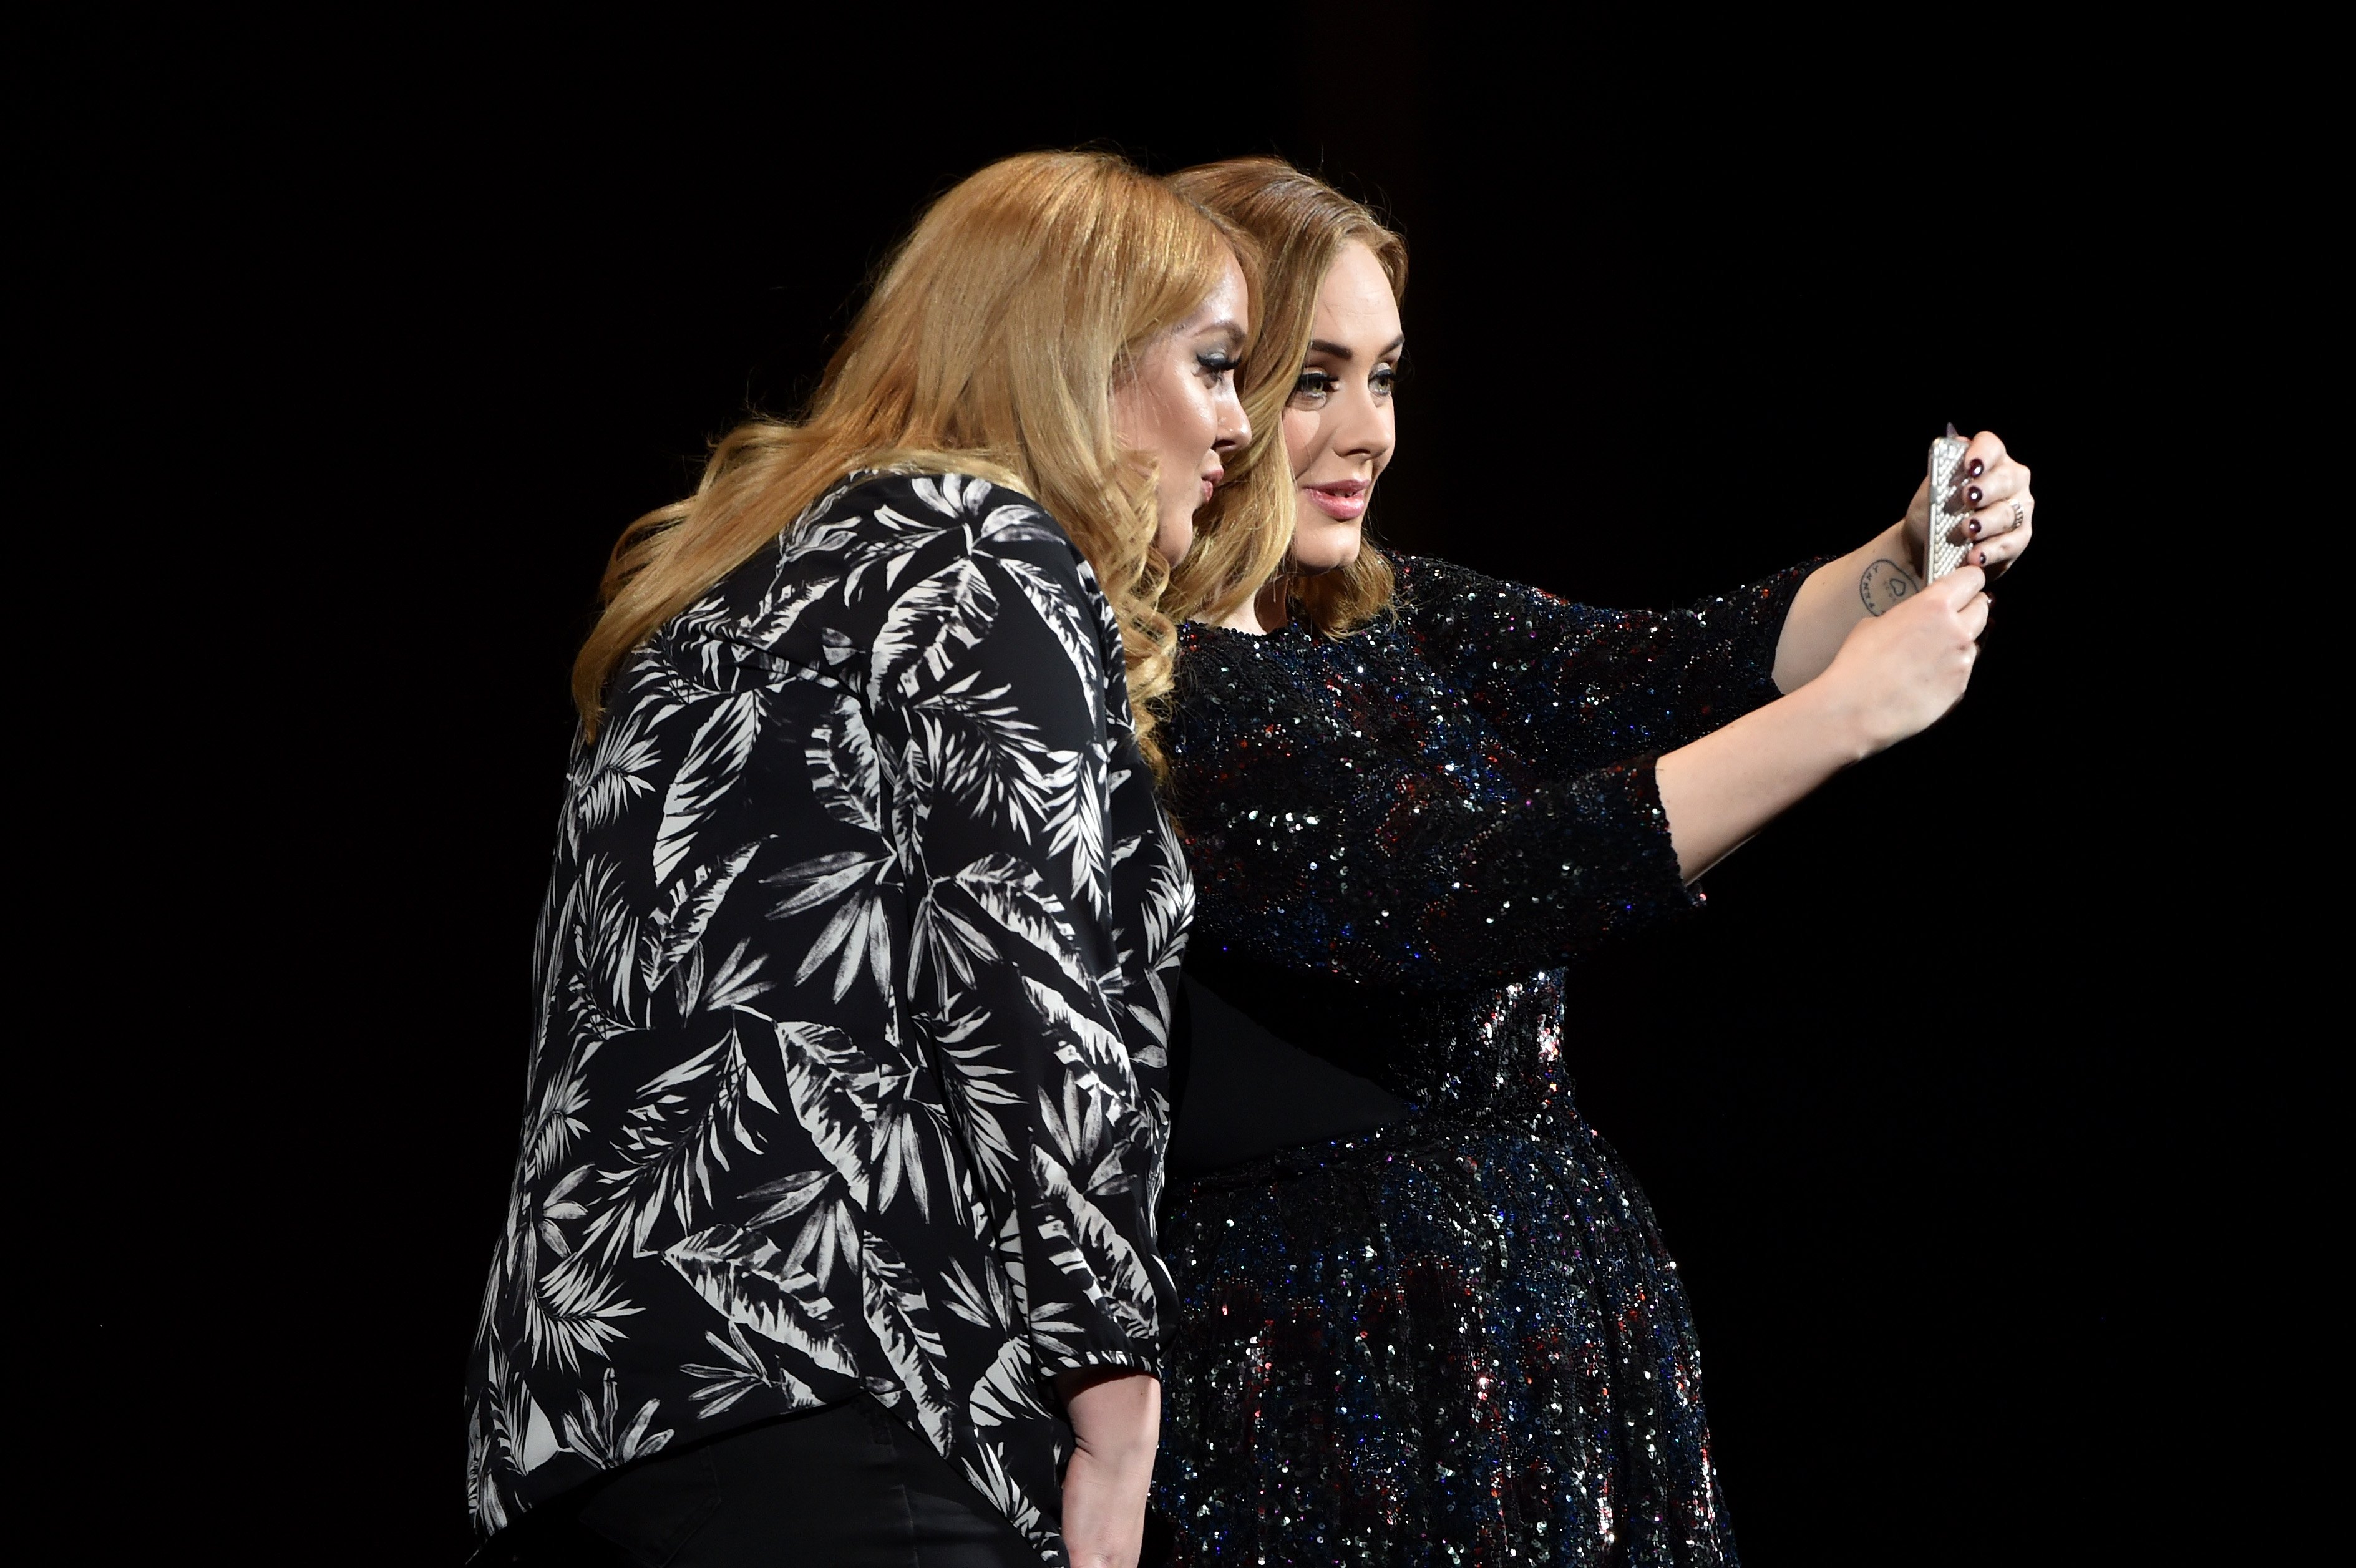 Adele performs at Genting Arena on March 29, 2016 in Birmingham, England. (Gareth Cattermole—Getty Images)